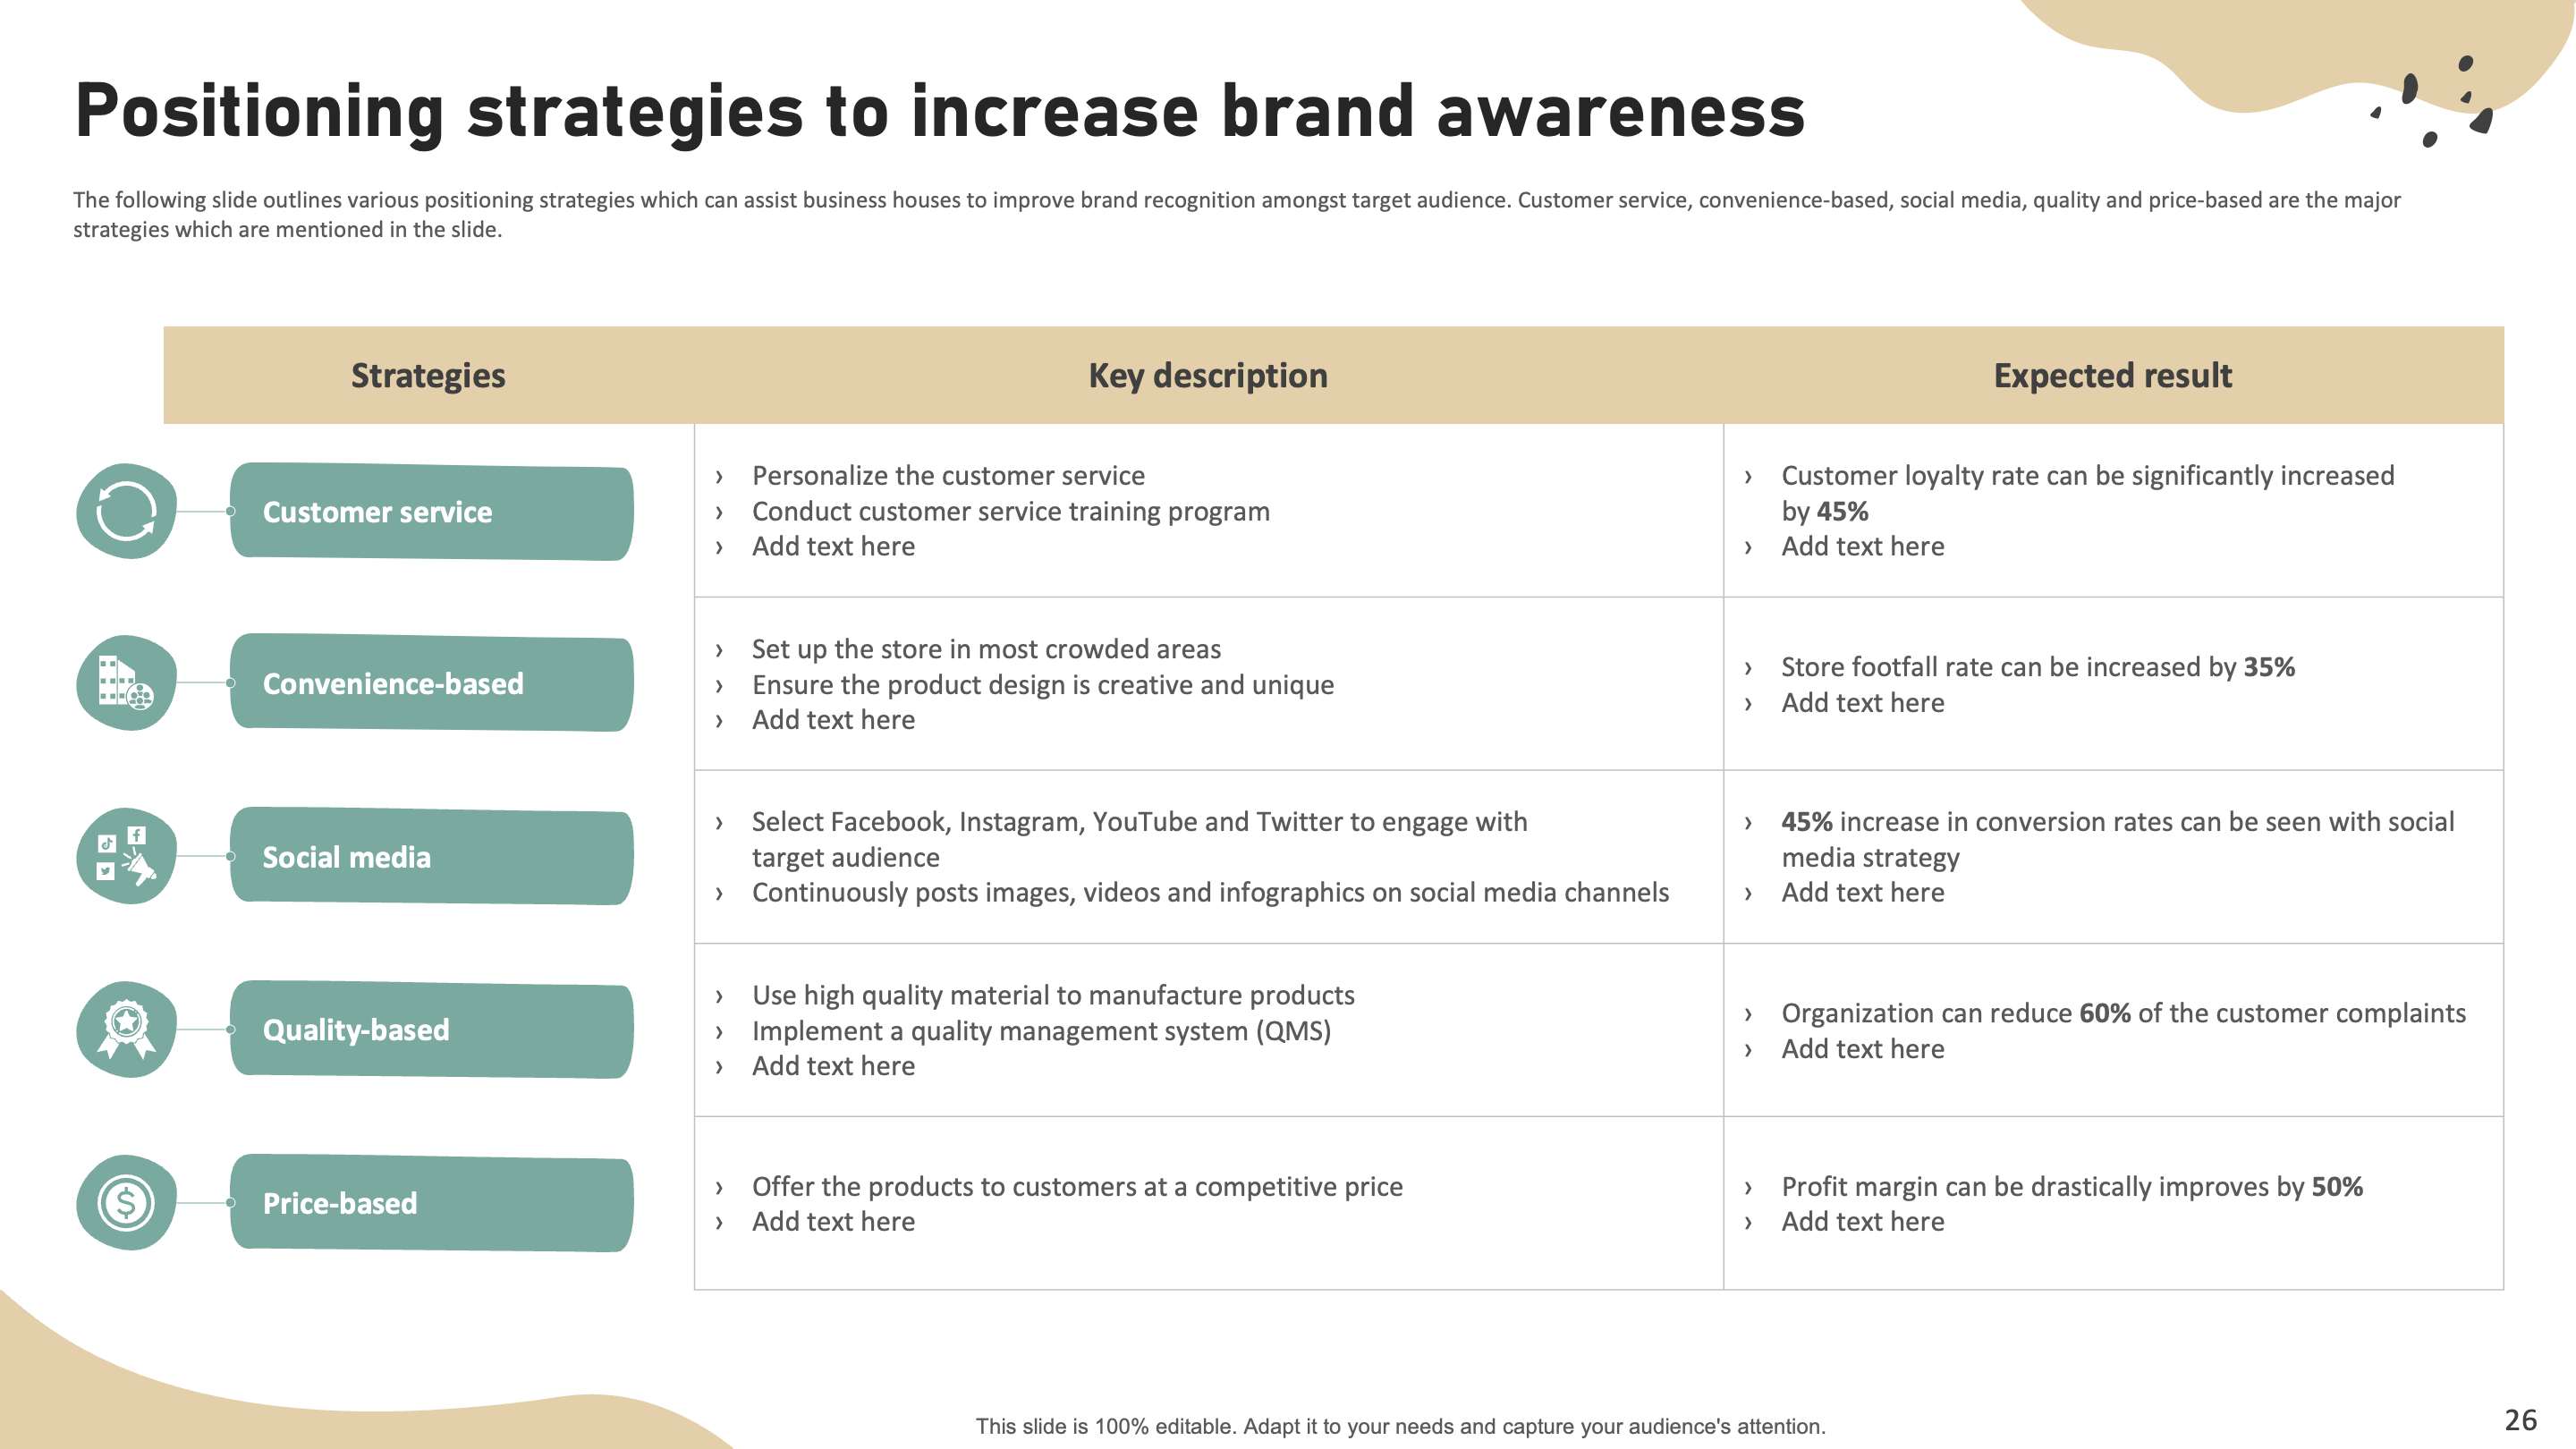 Positioning Strategies to Increase Brand Awareness